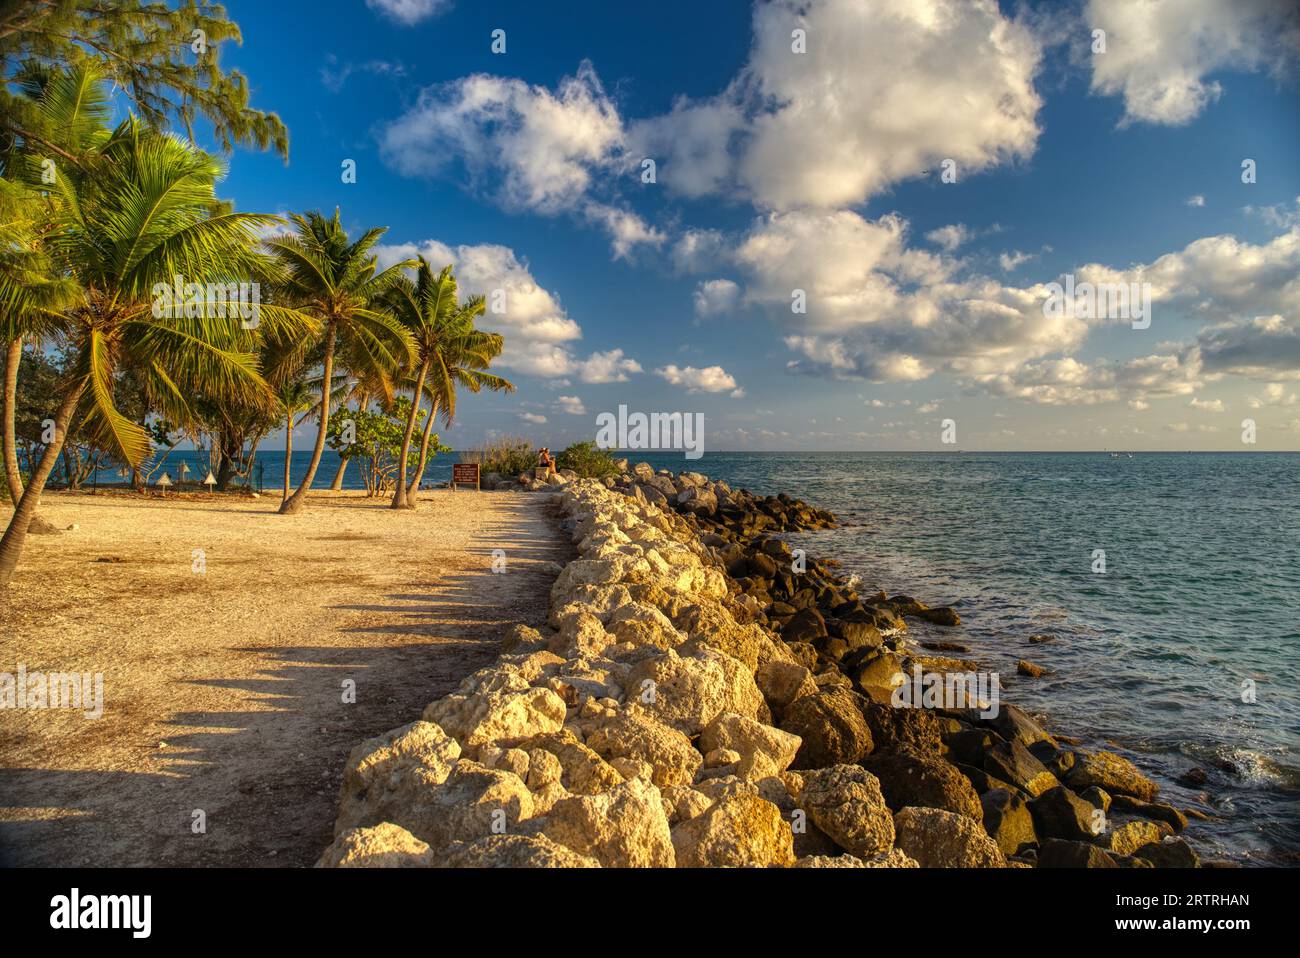 Florida Beaches are best beautiful and tranquil. Imagine the peace one would have when spending on an afternoon here. Stock Photo